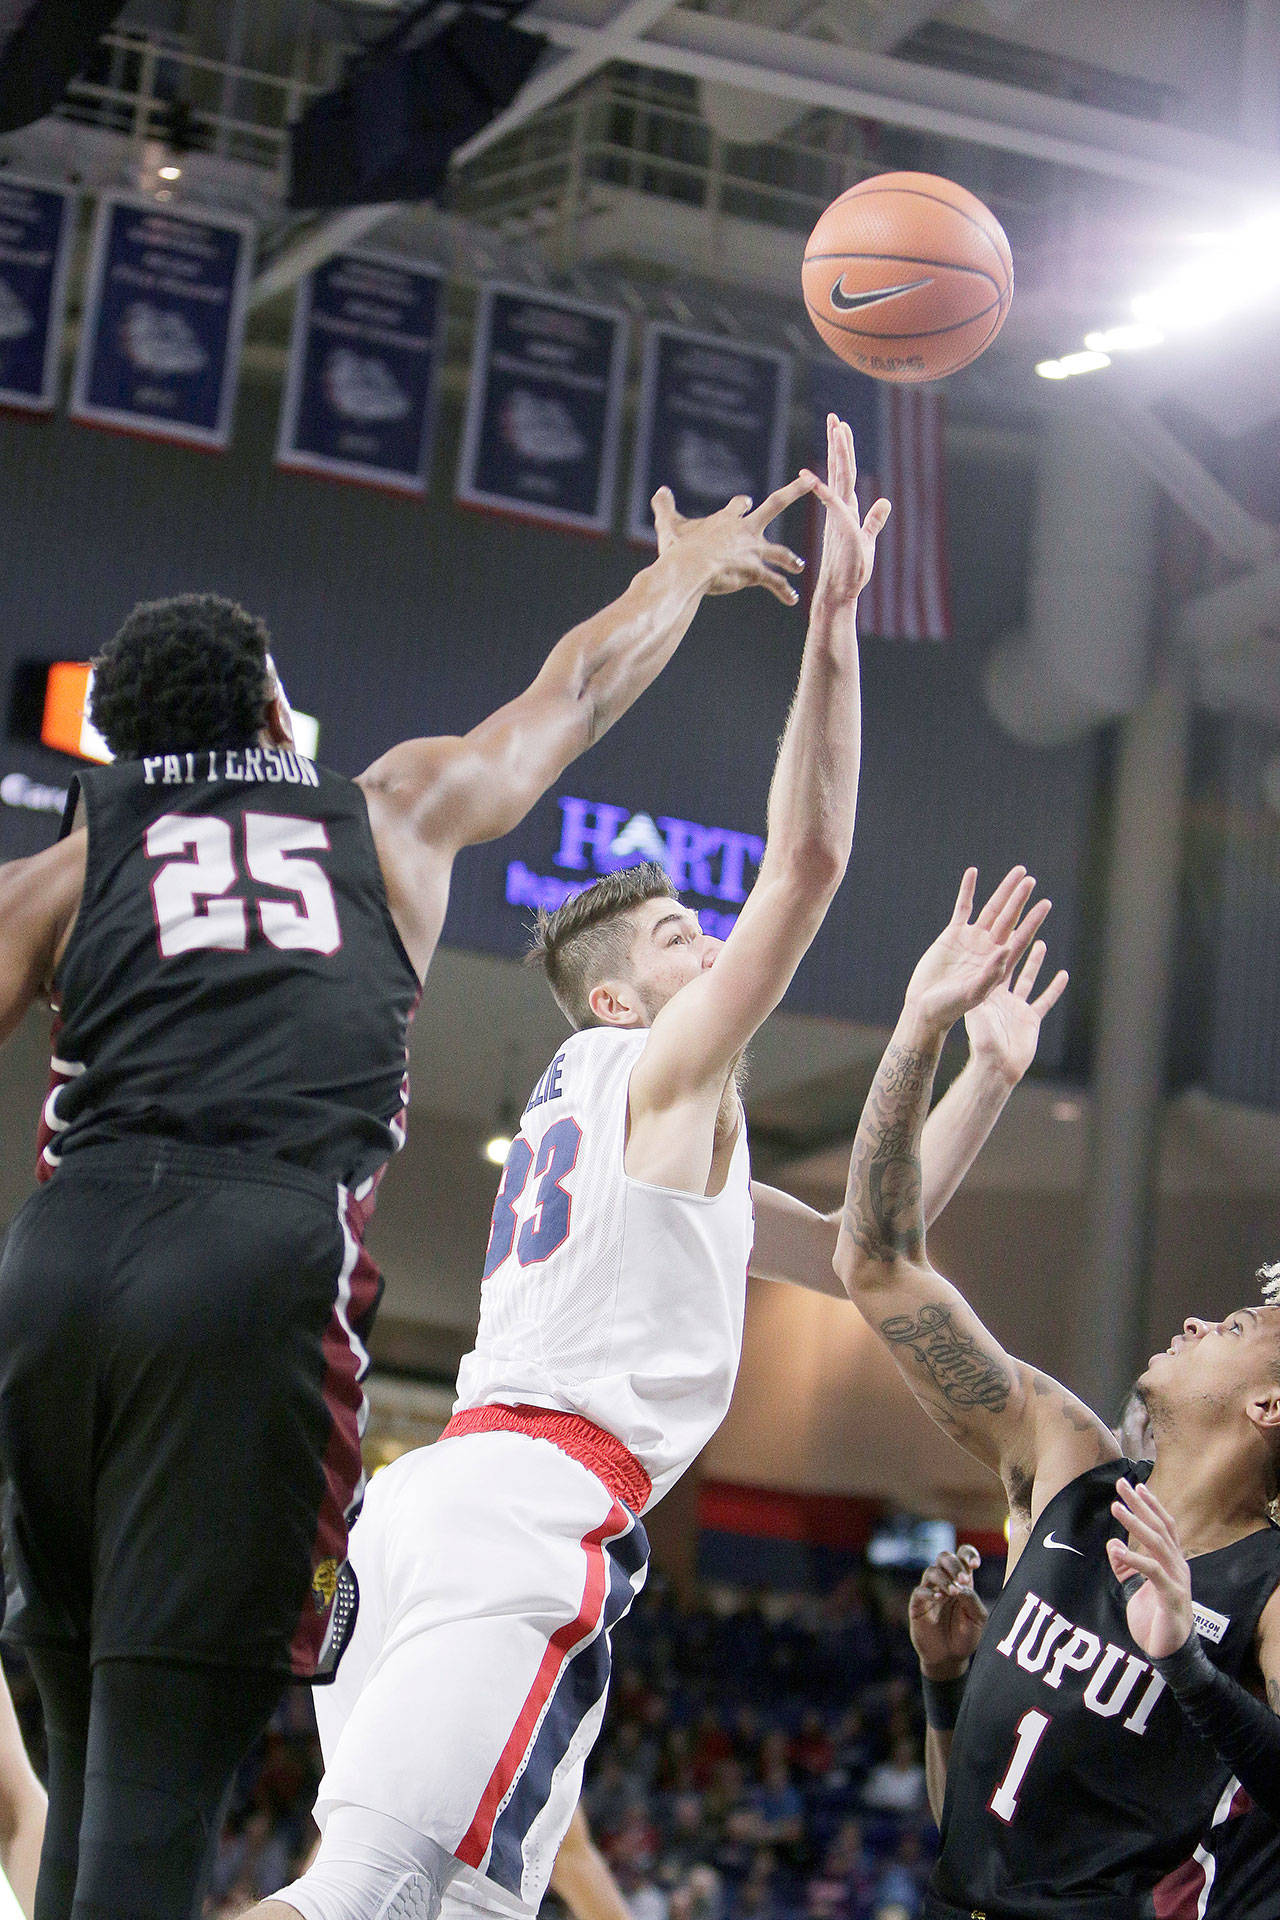 Gonzaga’s Killian Tillie (33) shoots between IUPUI’s Ron Patterson (25) and T.J. Henderson (1) during the first half of the No. 12 Bulldogs’ 101-71 win Monday in Spokane. (AP Photo/Young Kwak)